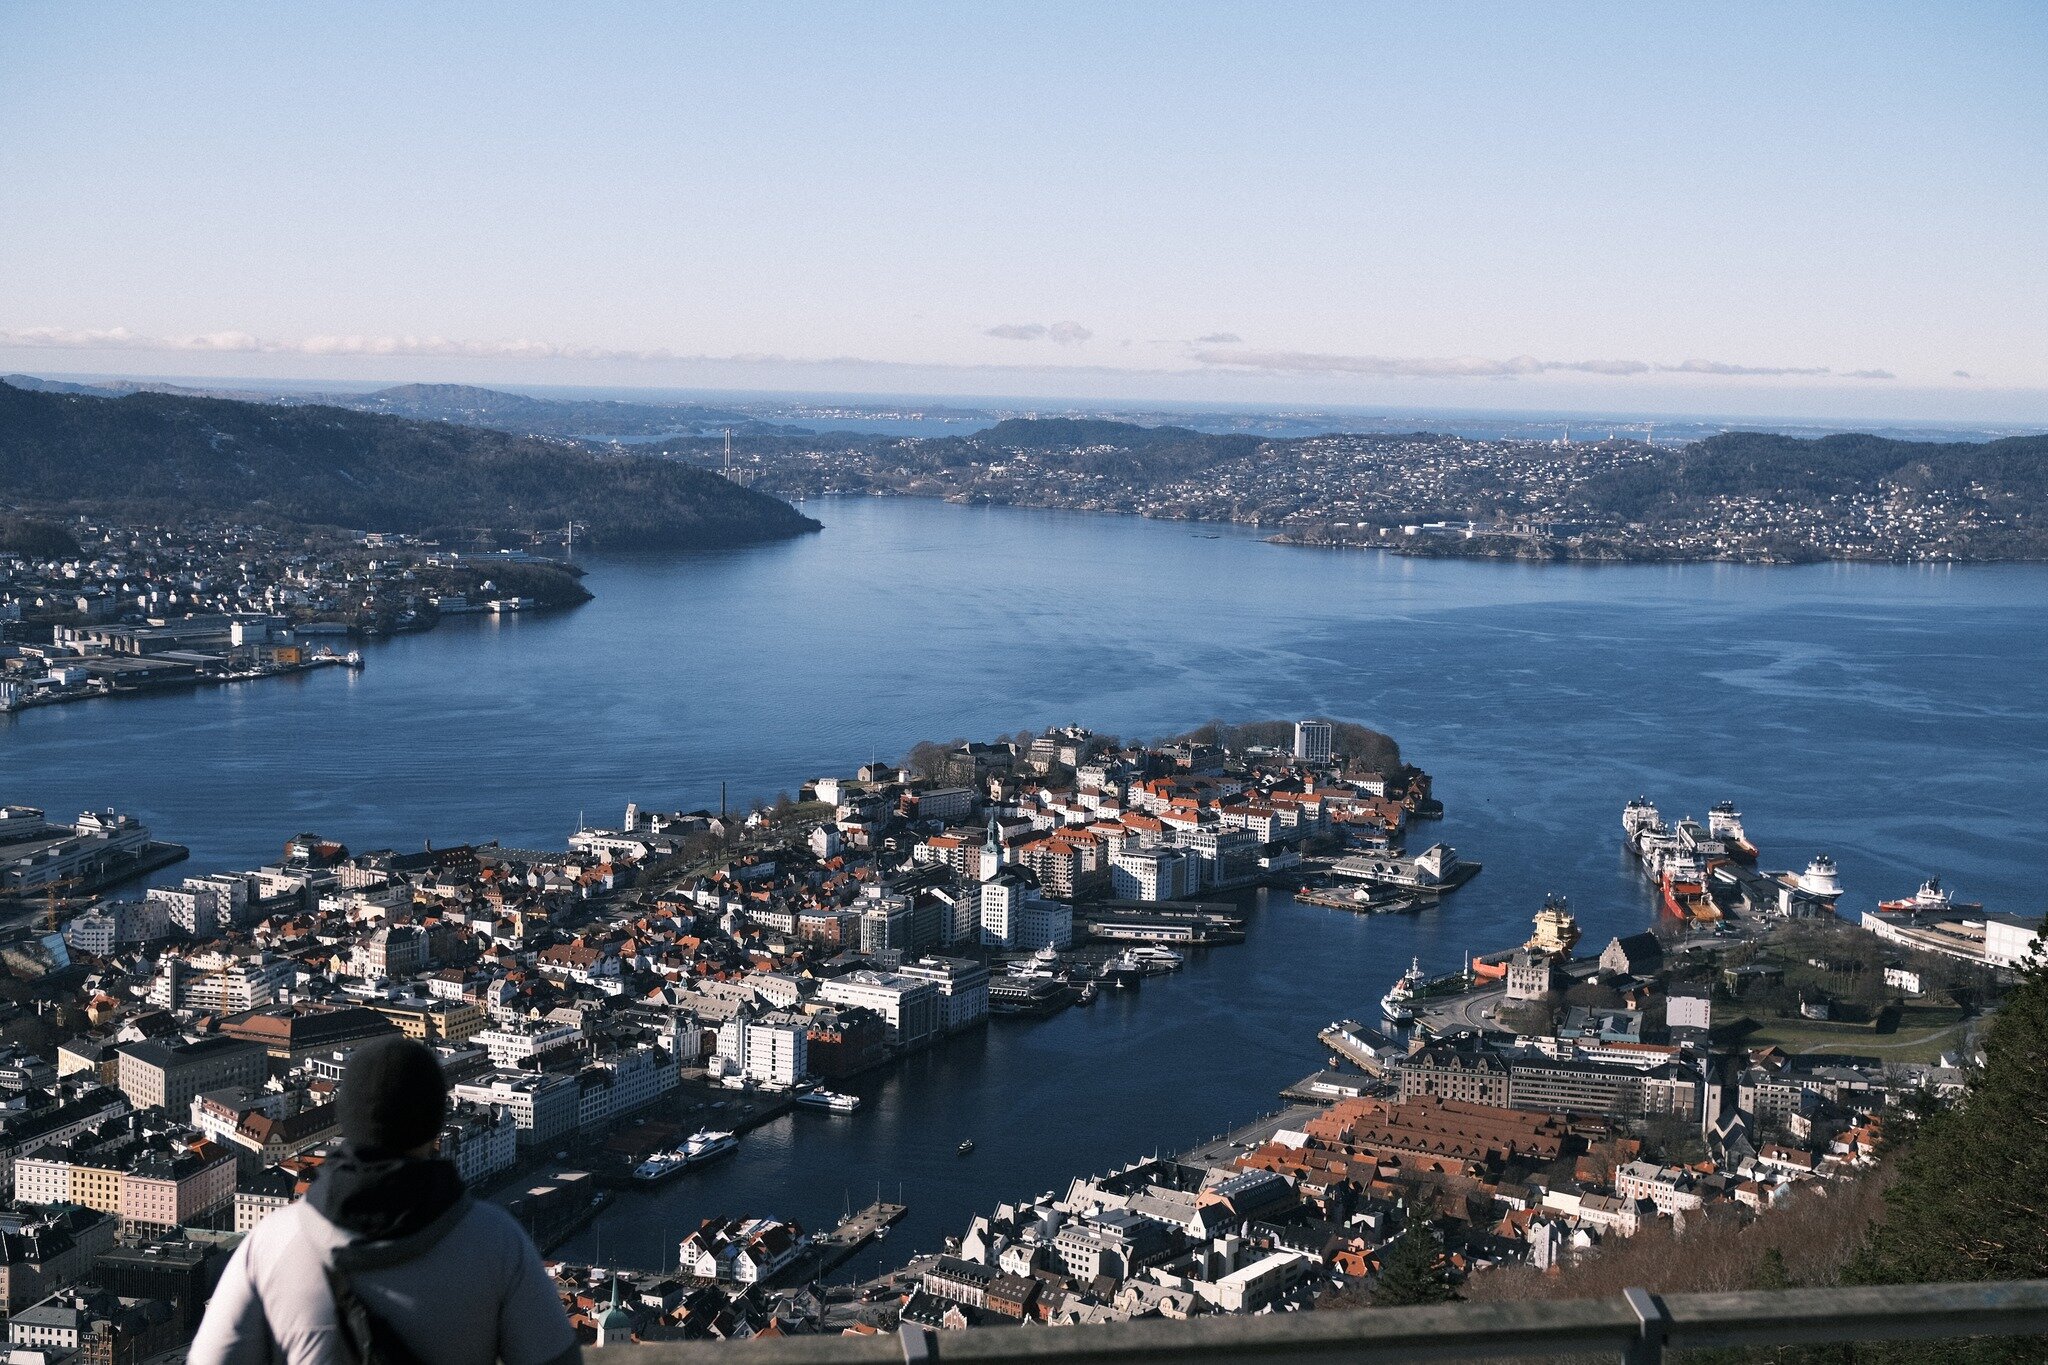 Bergen's Vista
A contemplative figure stands against the sweeping vista of Bergen, enveloped by the grandeur of fjords and the sprawling city.
📷 Fujifilm X-T30 II⁣
___
#BergenPanorama #FjordViews #CityObservations #NorwayScenery #UrbanExploration #S